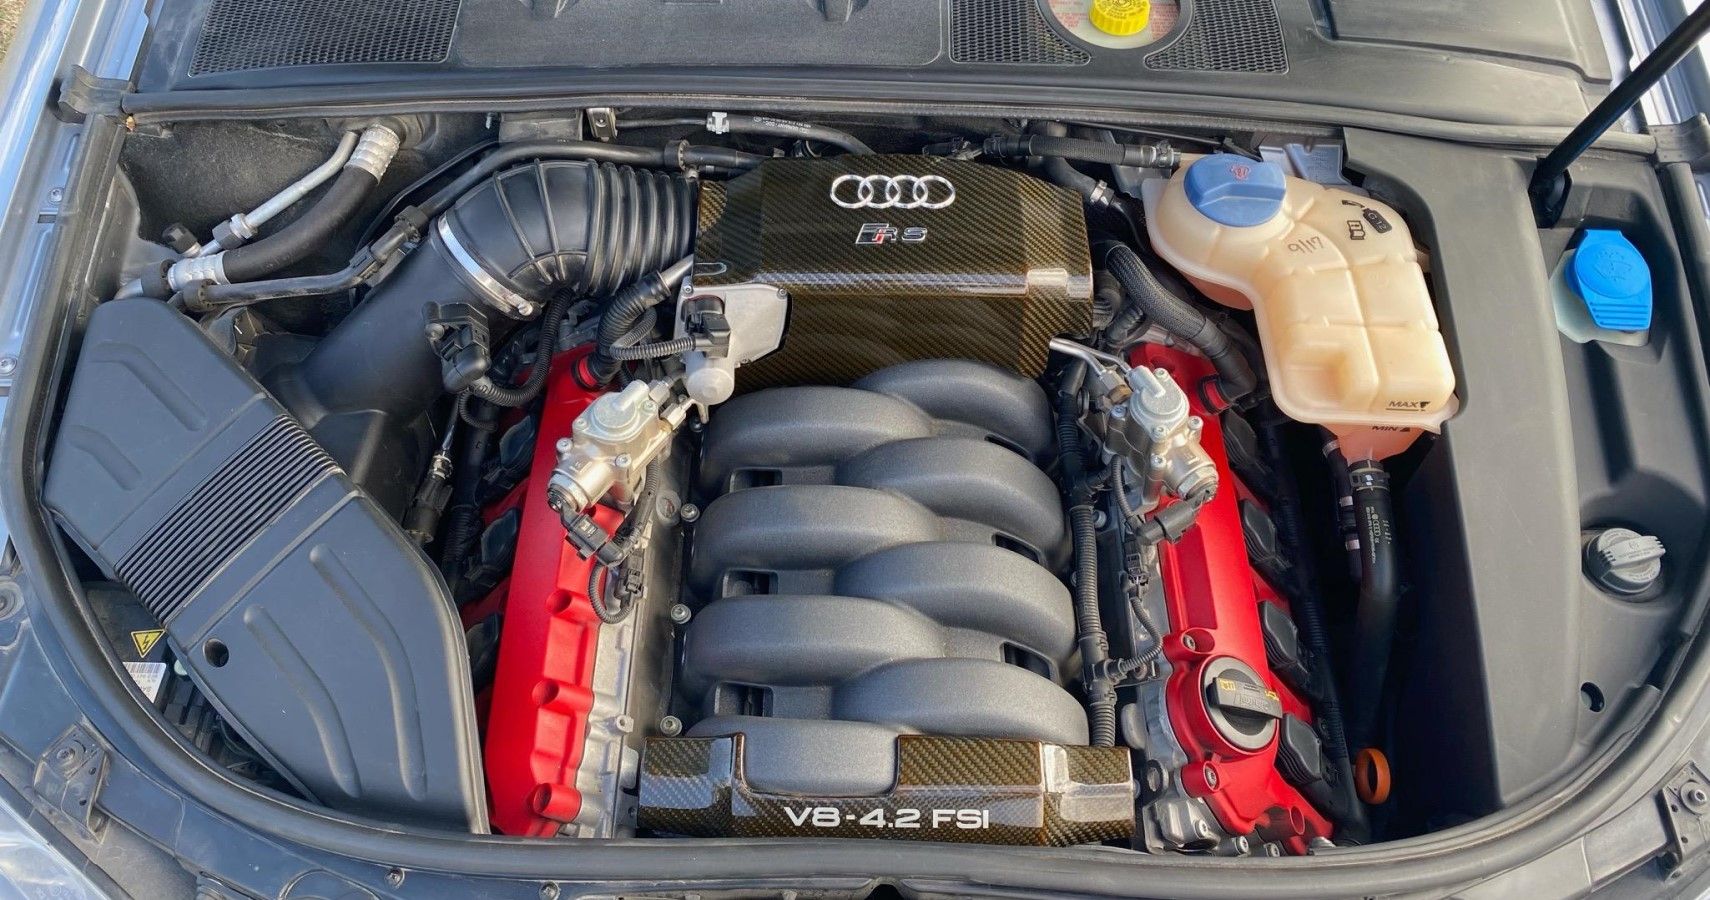 2008 Audi RS4 engine bay close up view